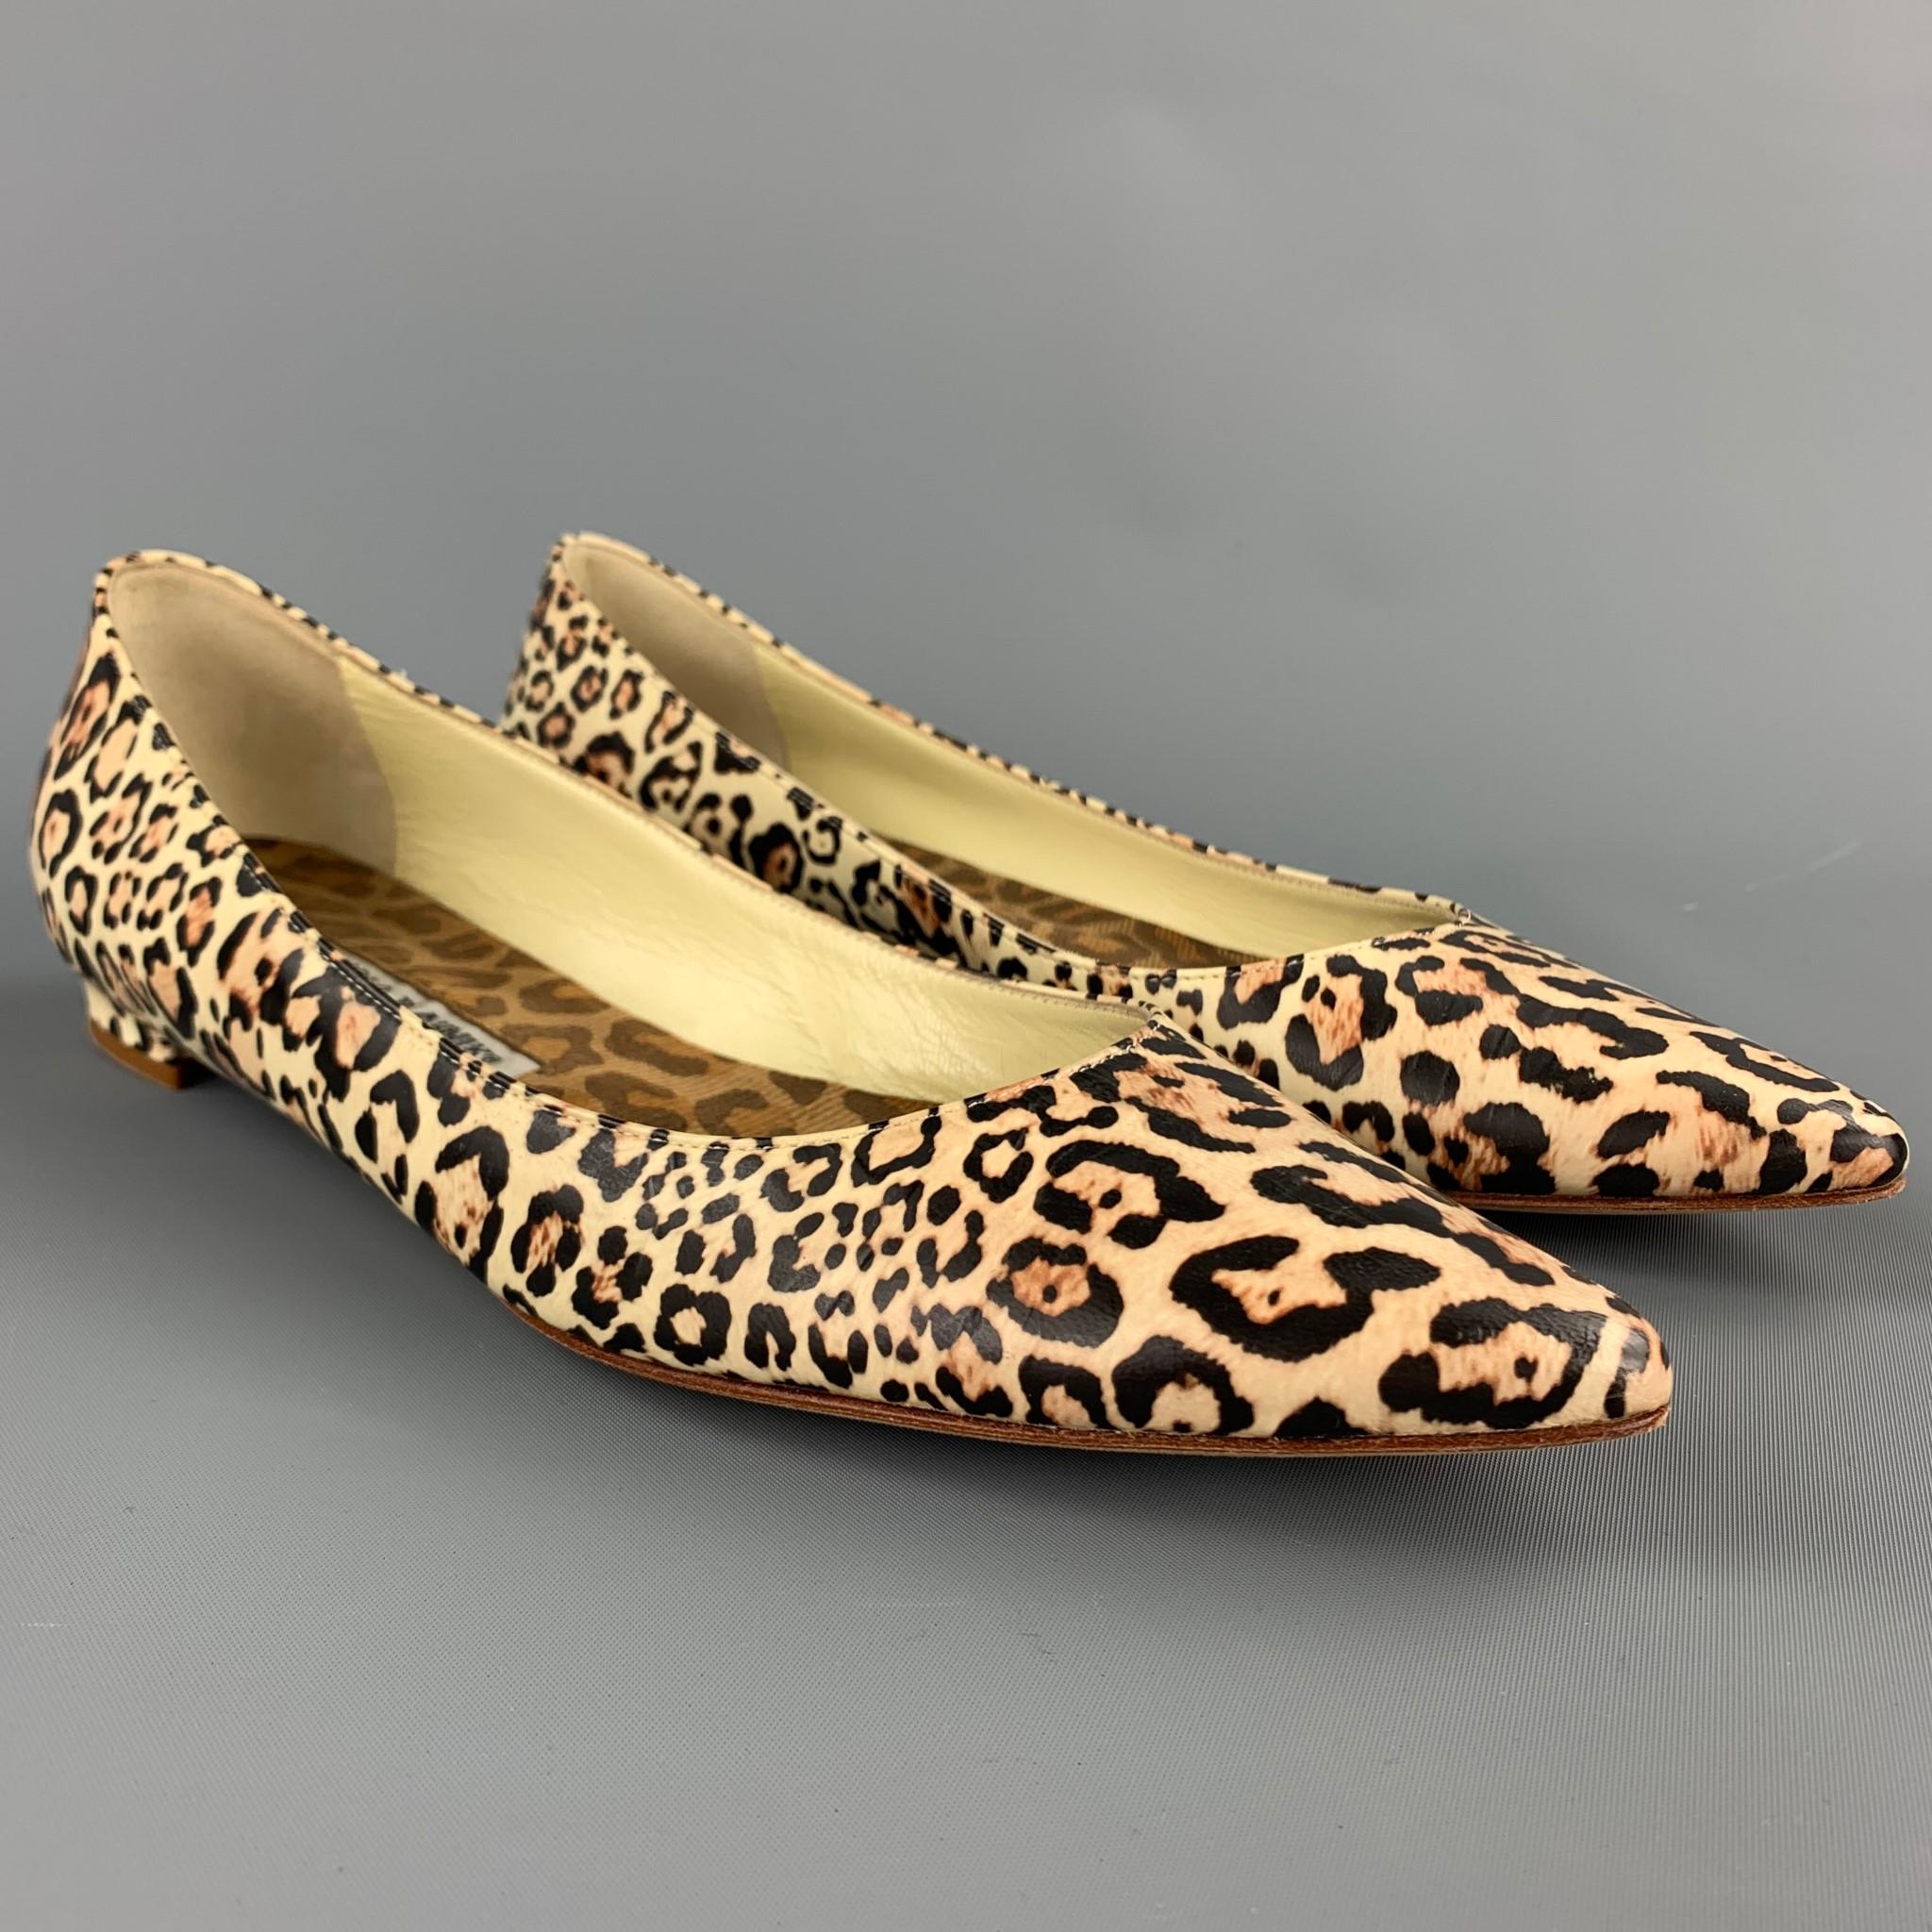 MANOLO BLAHNIK flats comes in a beige animal print leather featuring a pointed toe and a rubber heel. Made in Italy.

Good Pre-Owned Condition.
Marked: EU 38.5

Outsole: 

10.5 in. x 3 in. 
